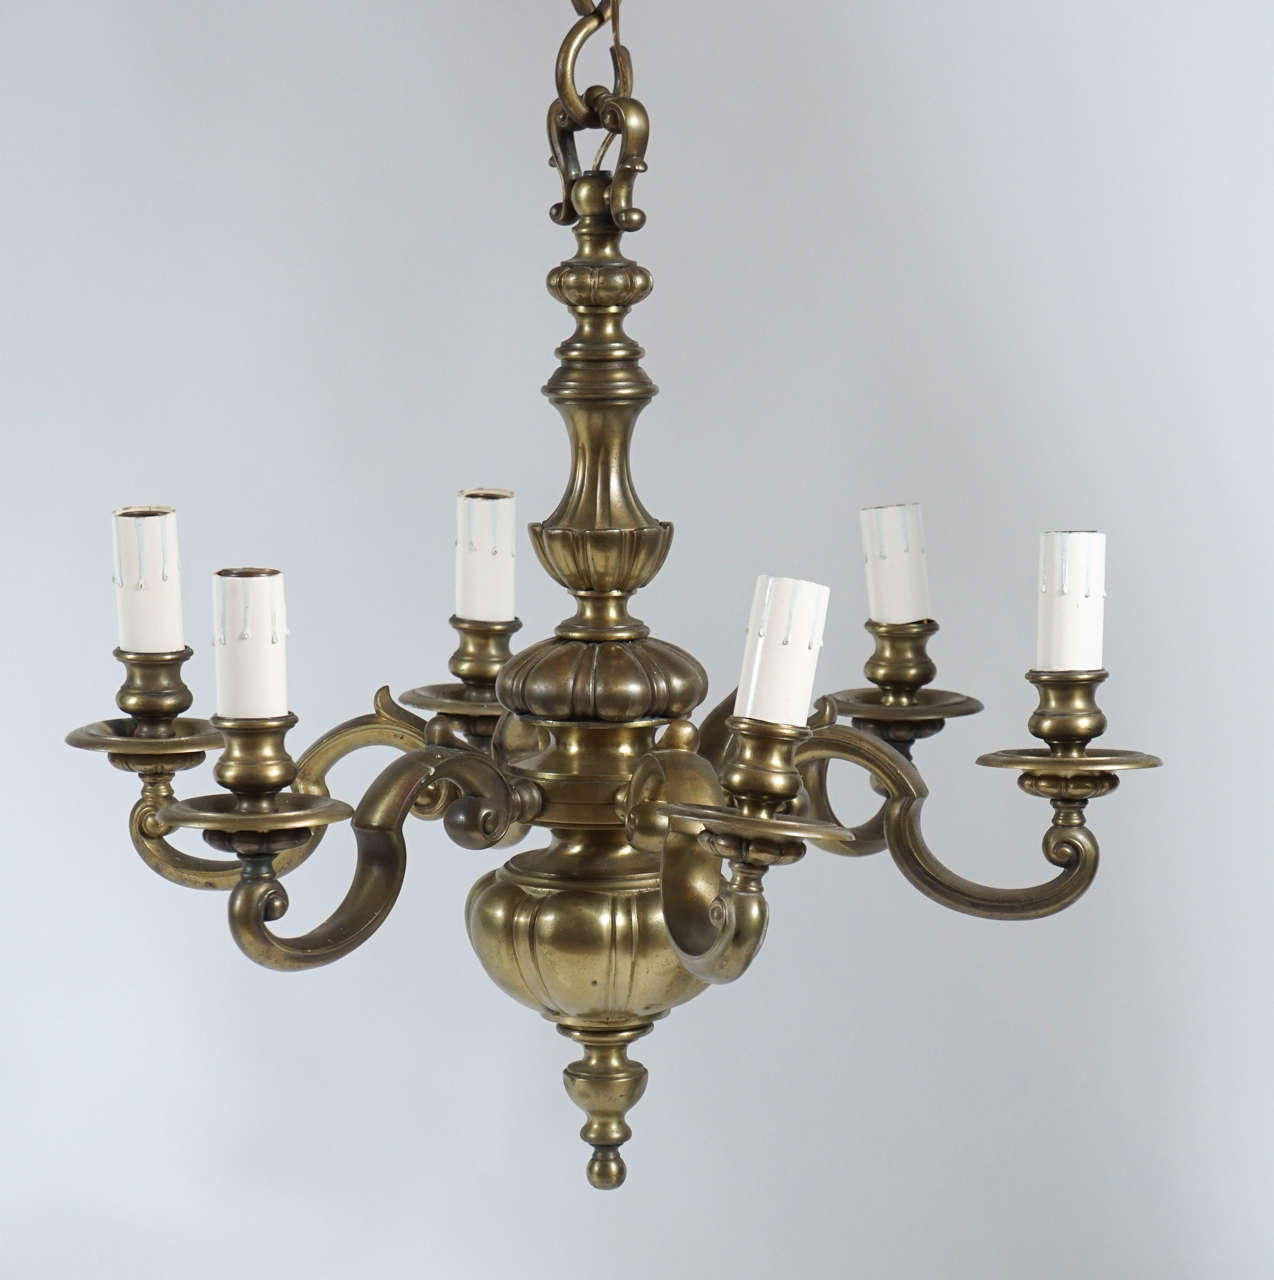 Edwardian English Baroque style solid bronze six-light chandelier having six cusped scroll arms on gadrooned and fluted main body. Wonderful color and patina. Photos show a skewed arm, however all arms can be positioned as desired as they swivel.